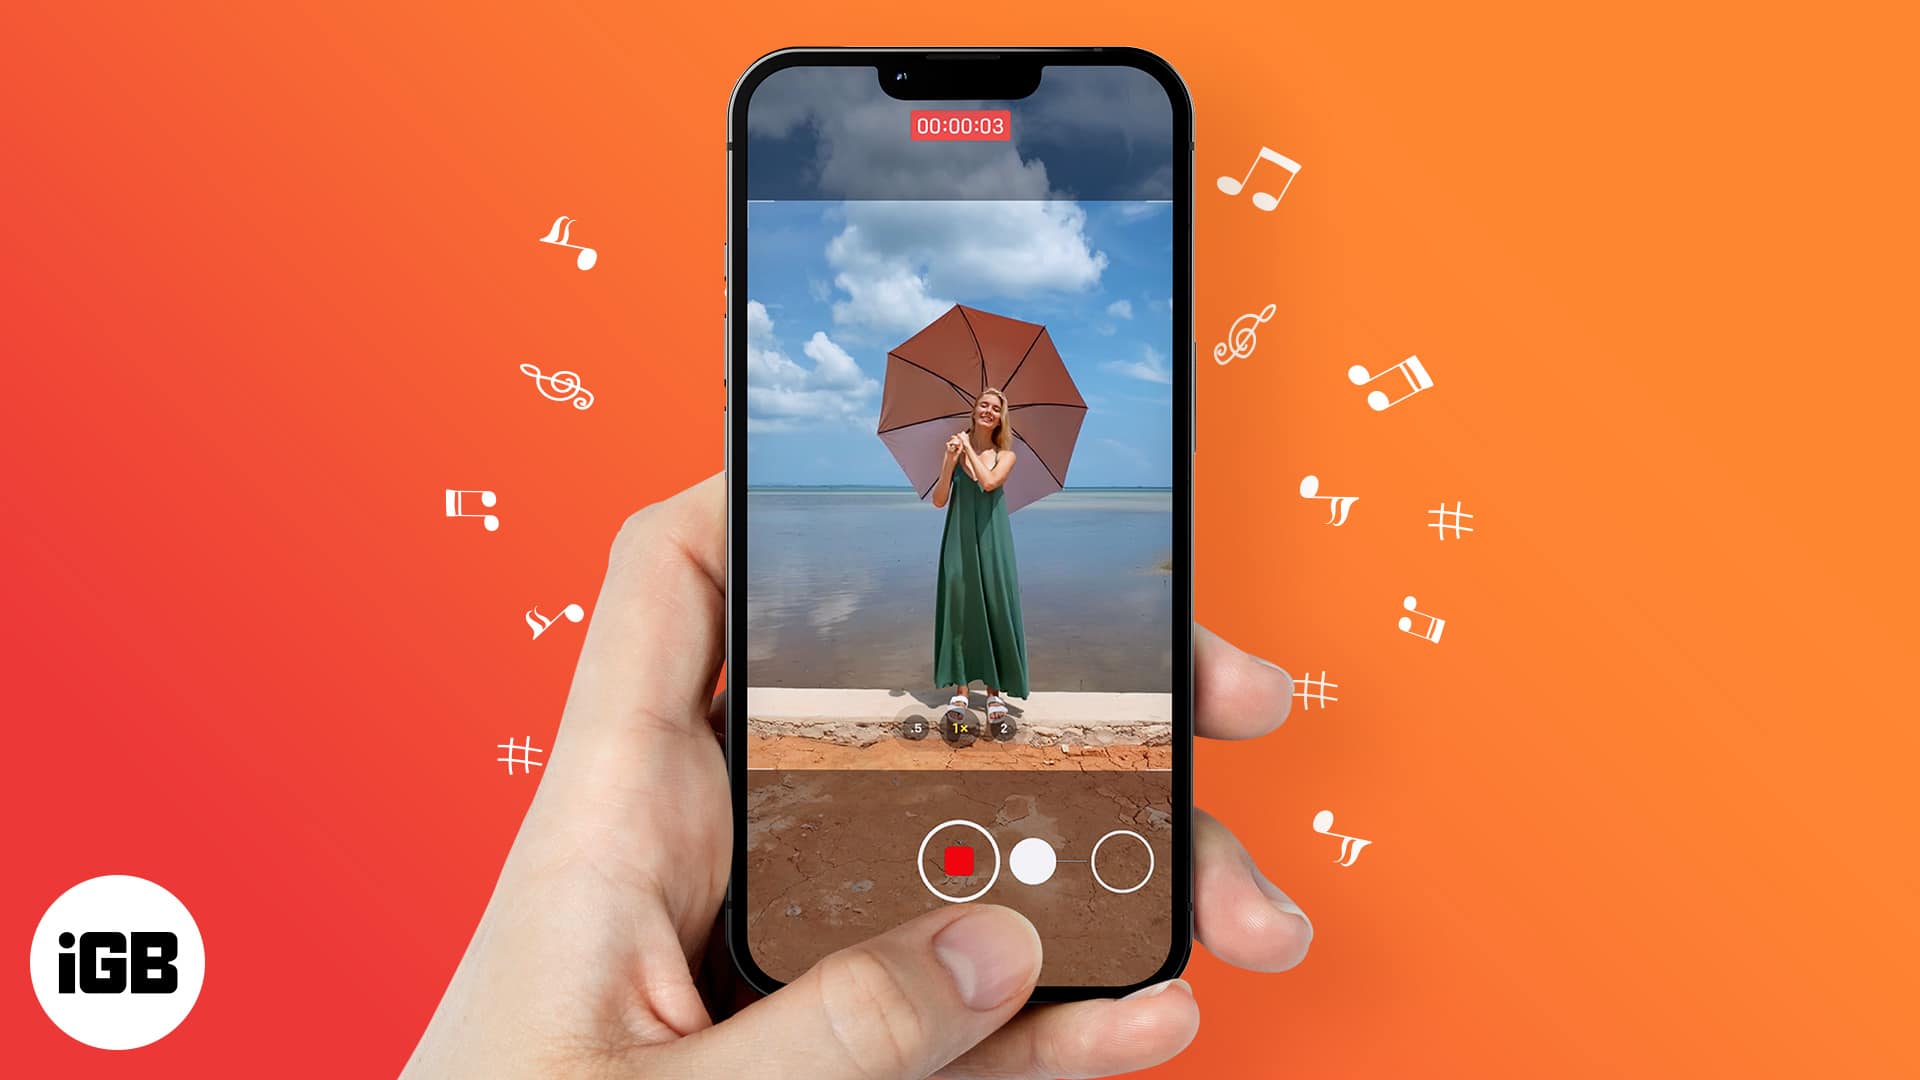 How to record video while playing music on your iphone